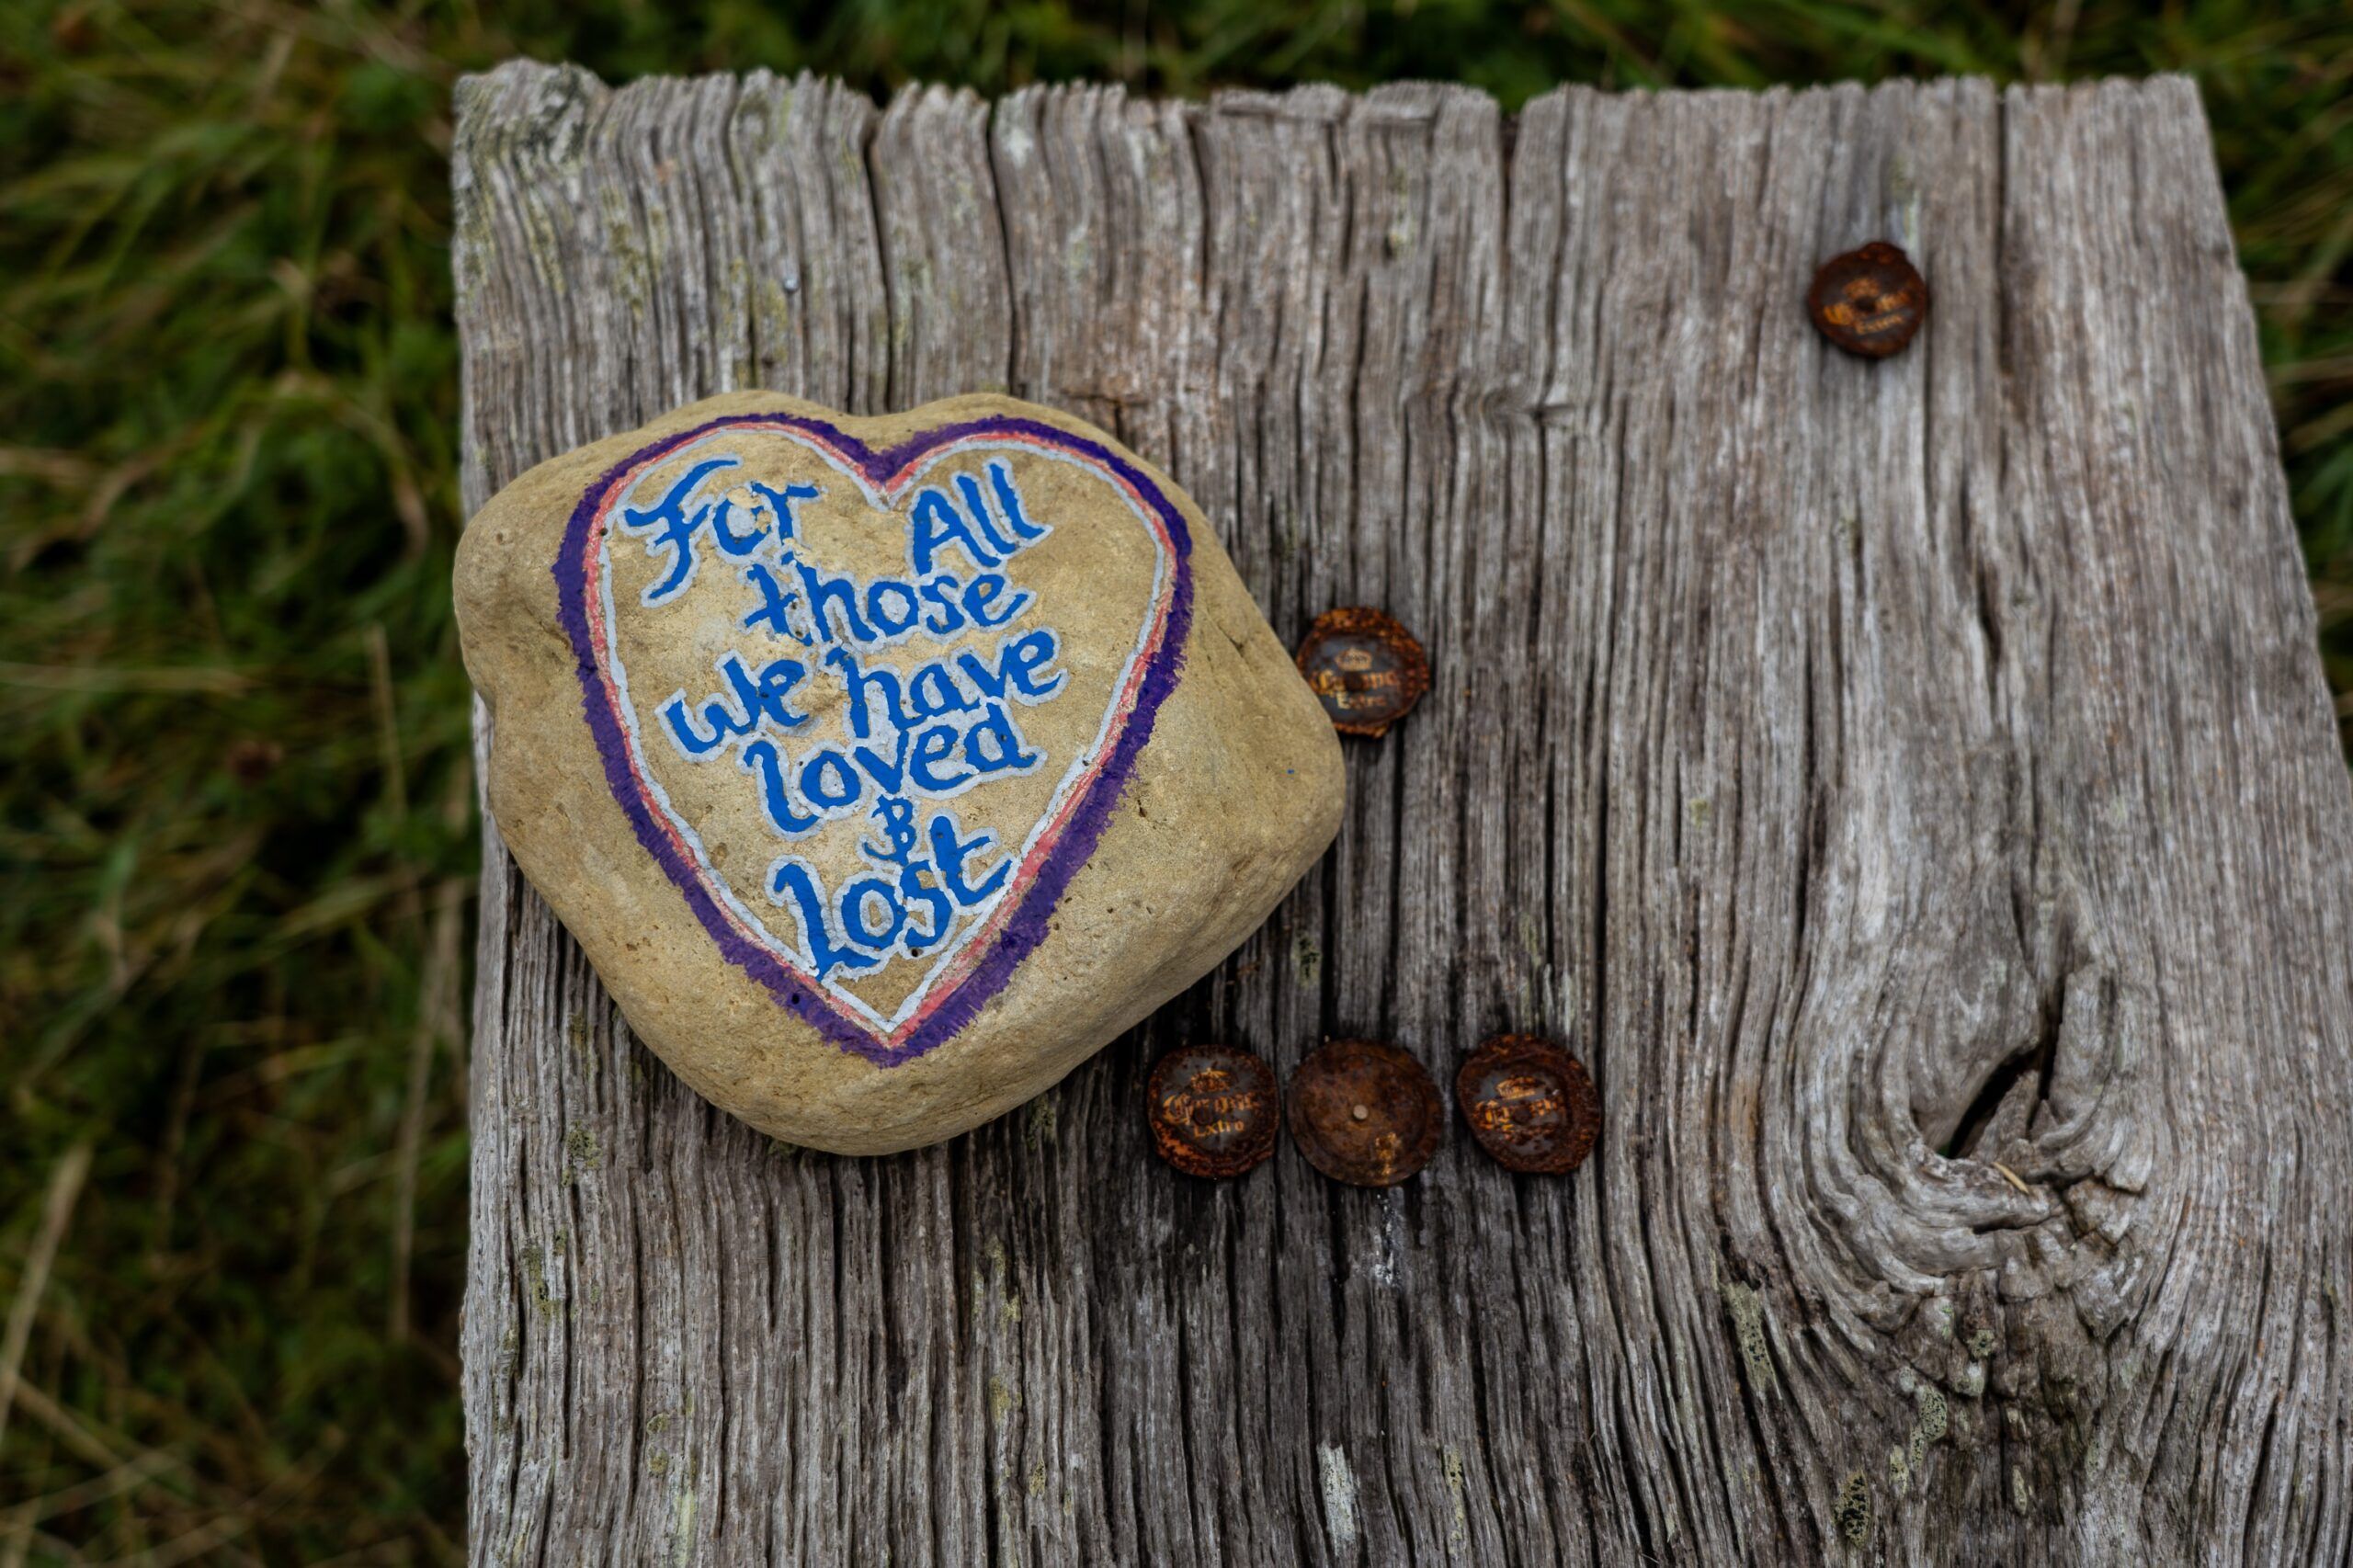 A pebble painted with the words: "For all those who have loved and lost"